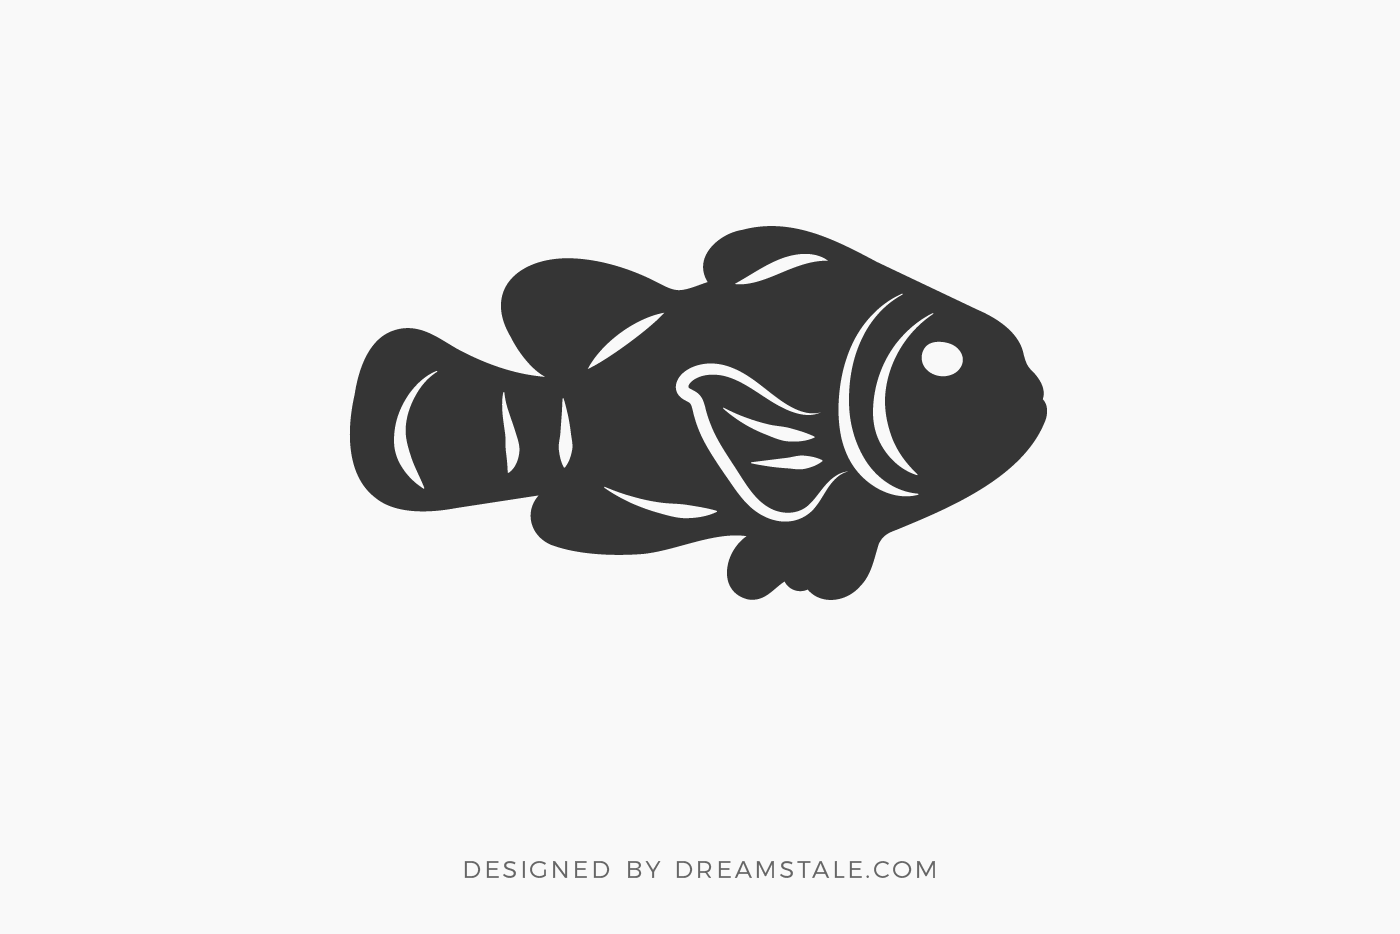 Download Free SVG Clownfish Tropical Fish Clipart - Dreamstale